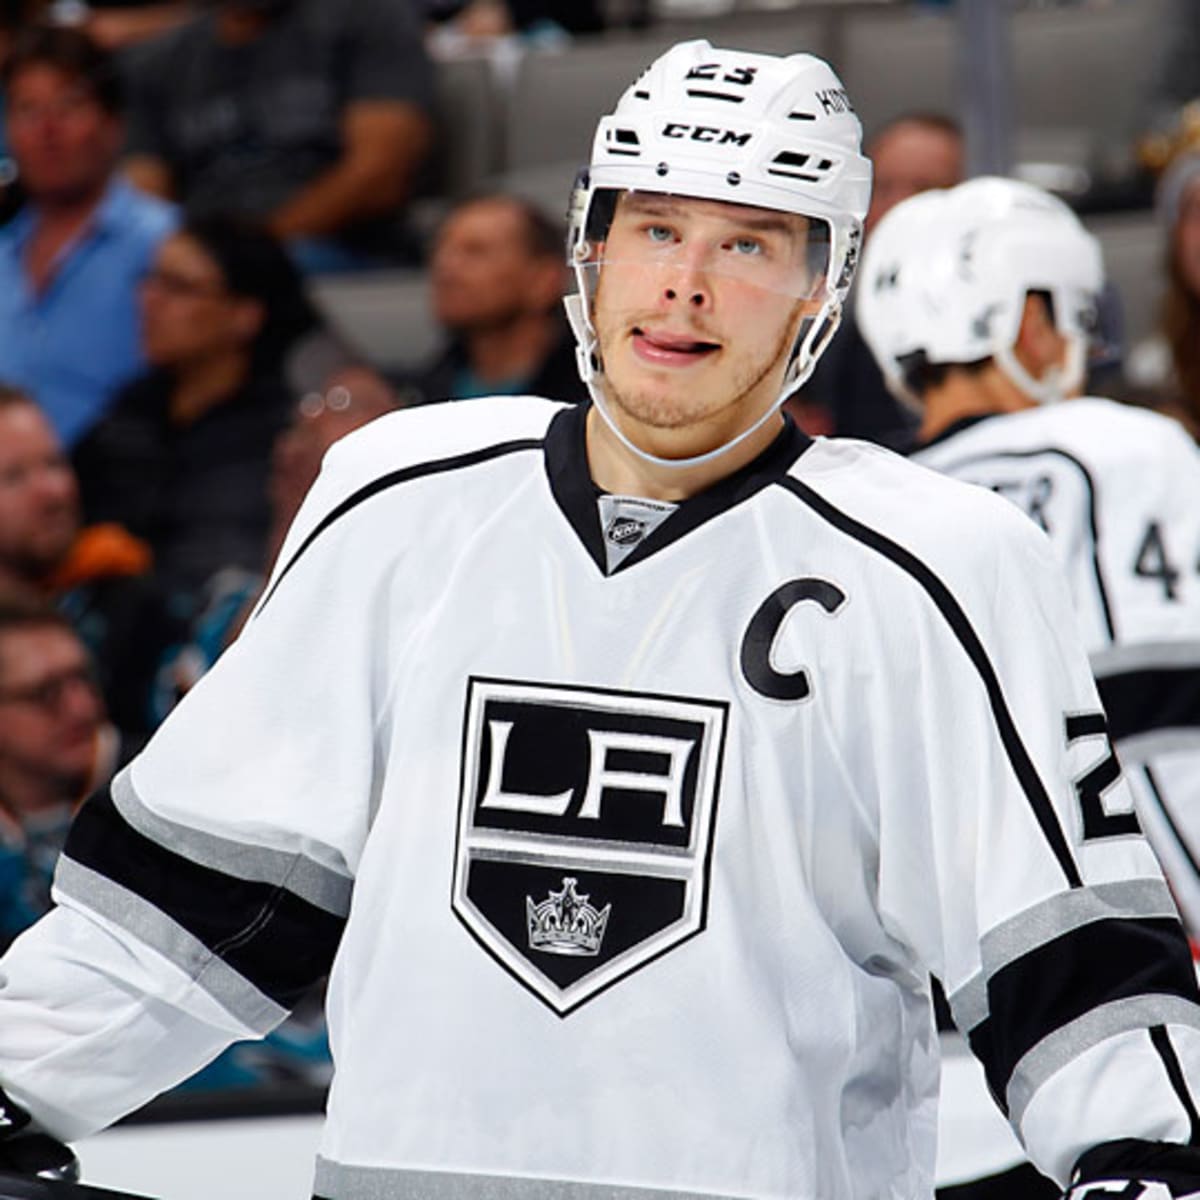 The Dustin Brown Tragedy - Battle of California